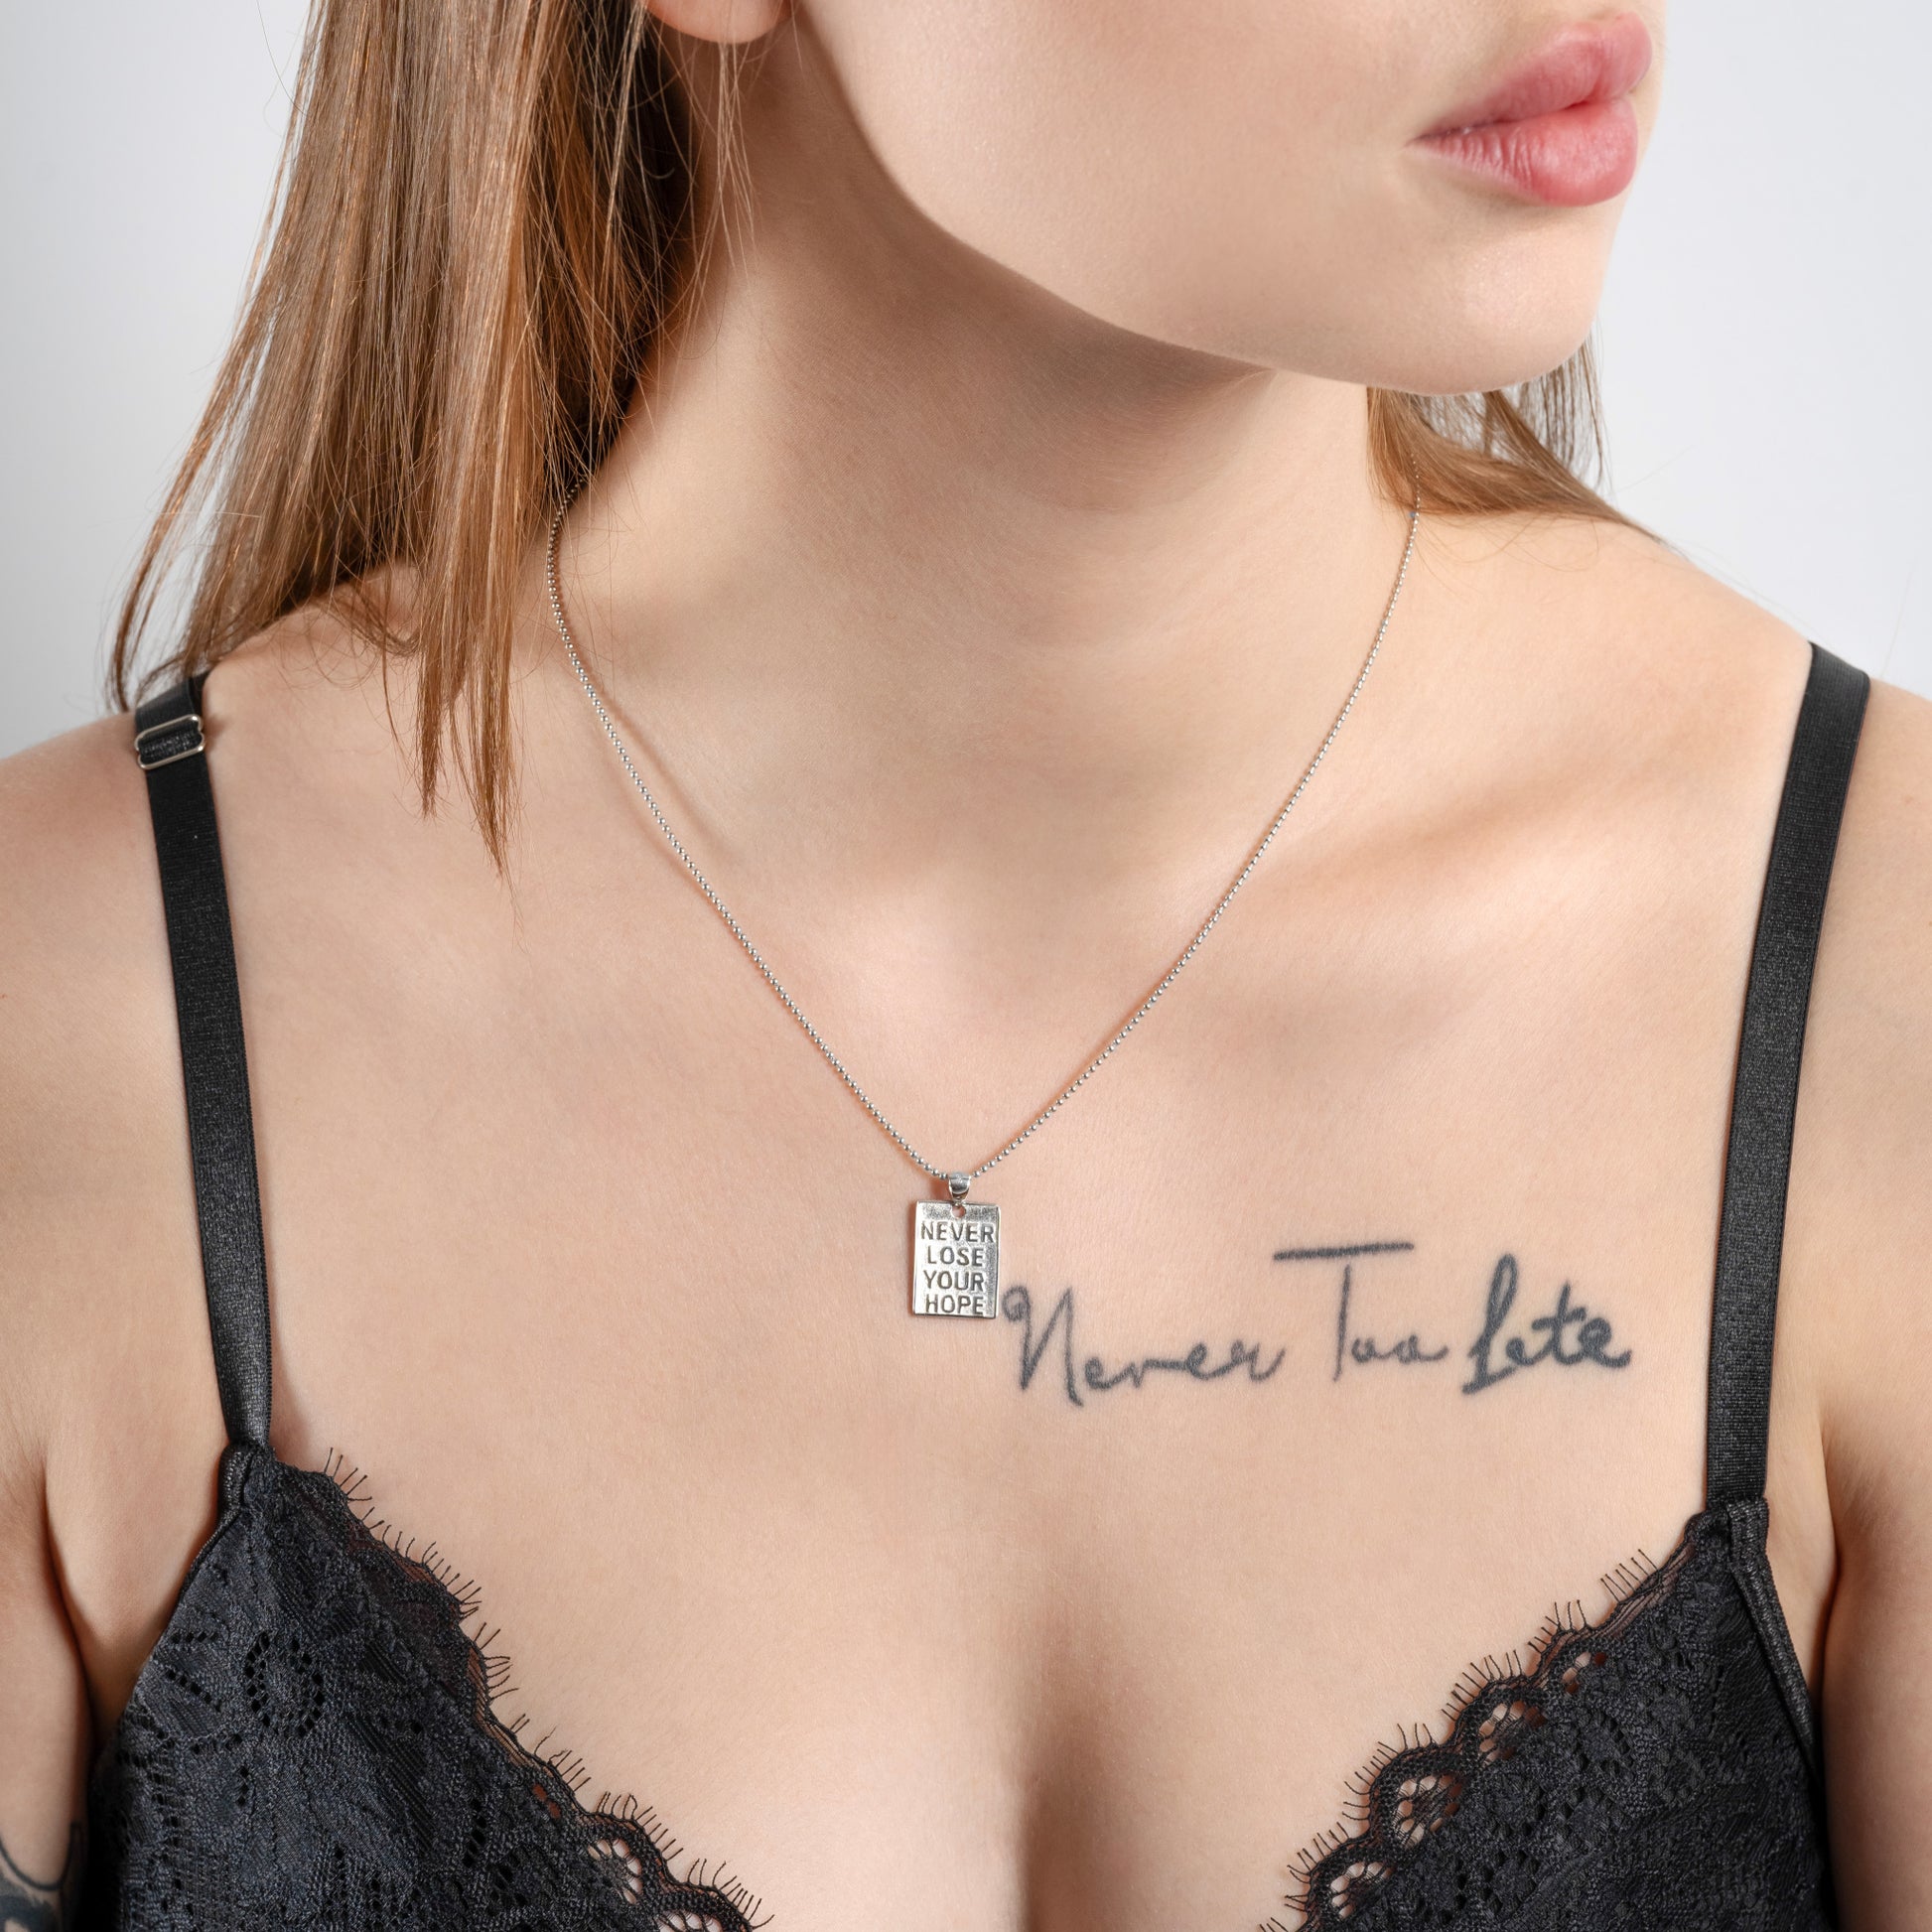 Tattooed women wearing Never Lose Your Hope Motivational Silver Necklace on her neck